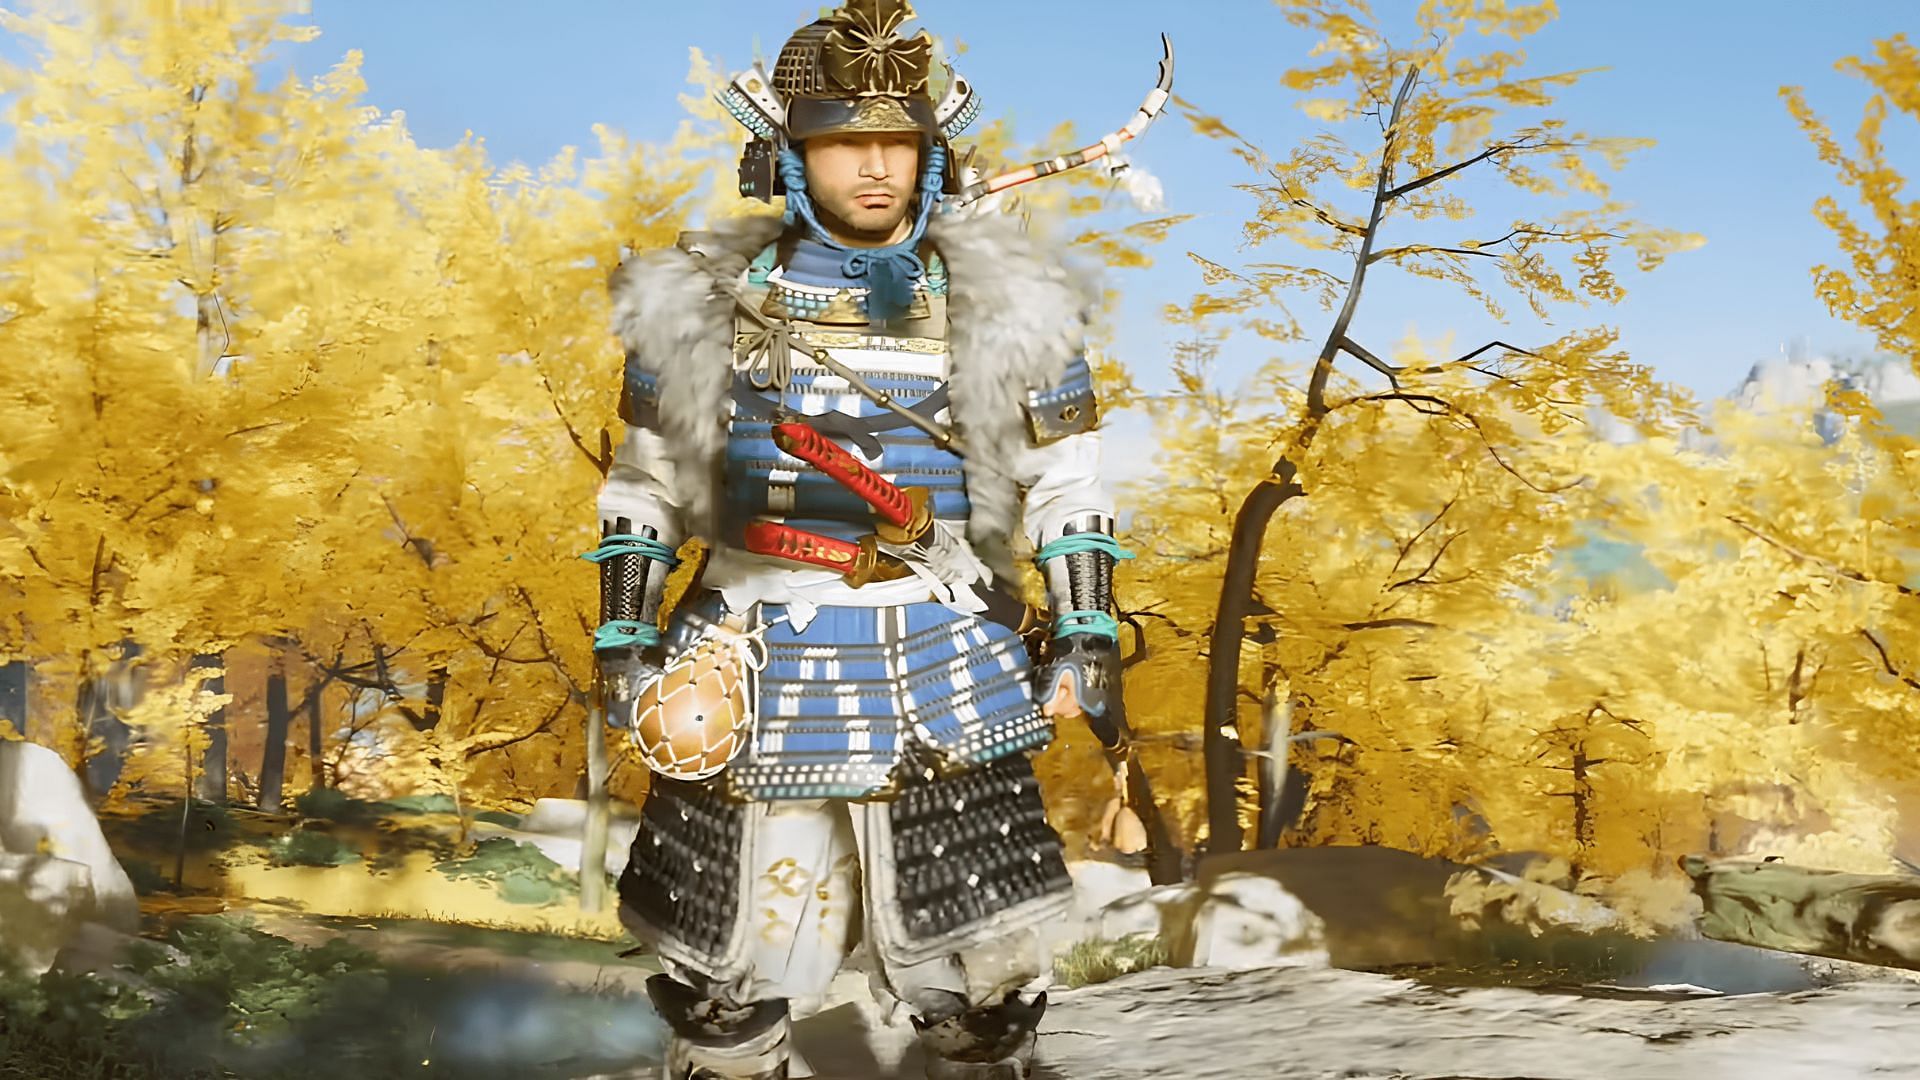 You need the deluxe edition to get the Hero of Tsushima armor set (Image via Sucker Punch || YouTube/JorRaptor)